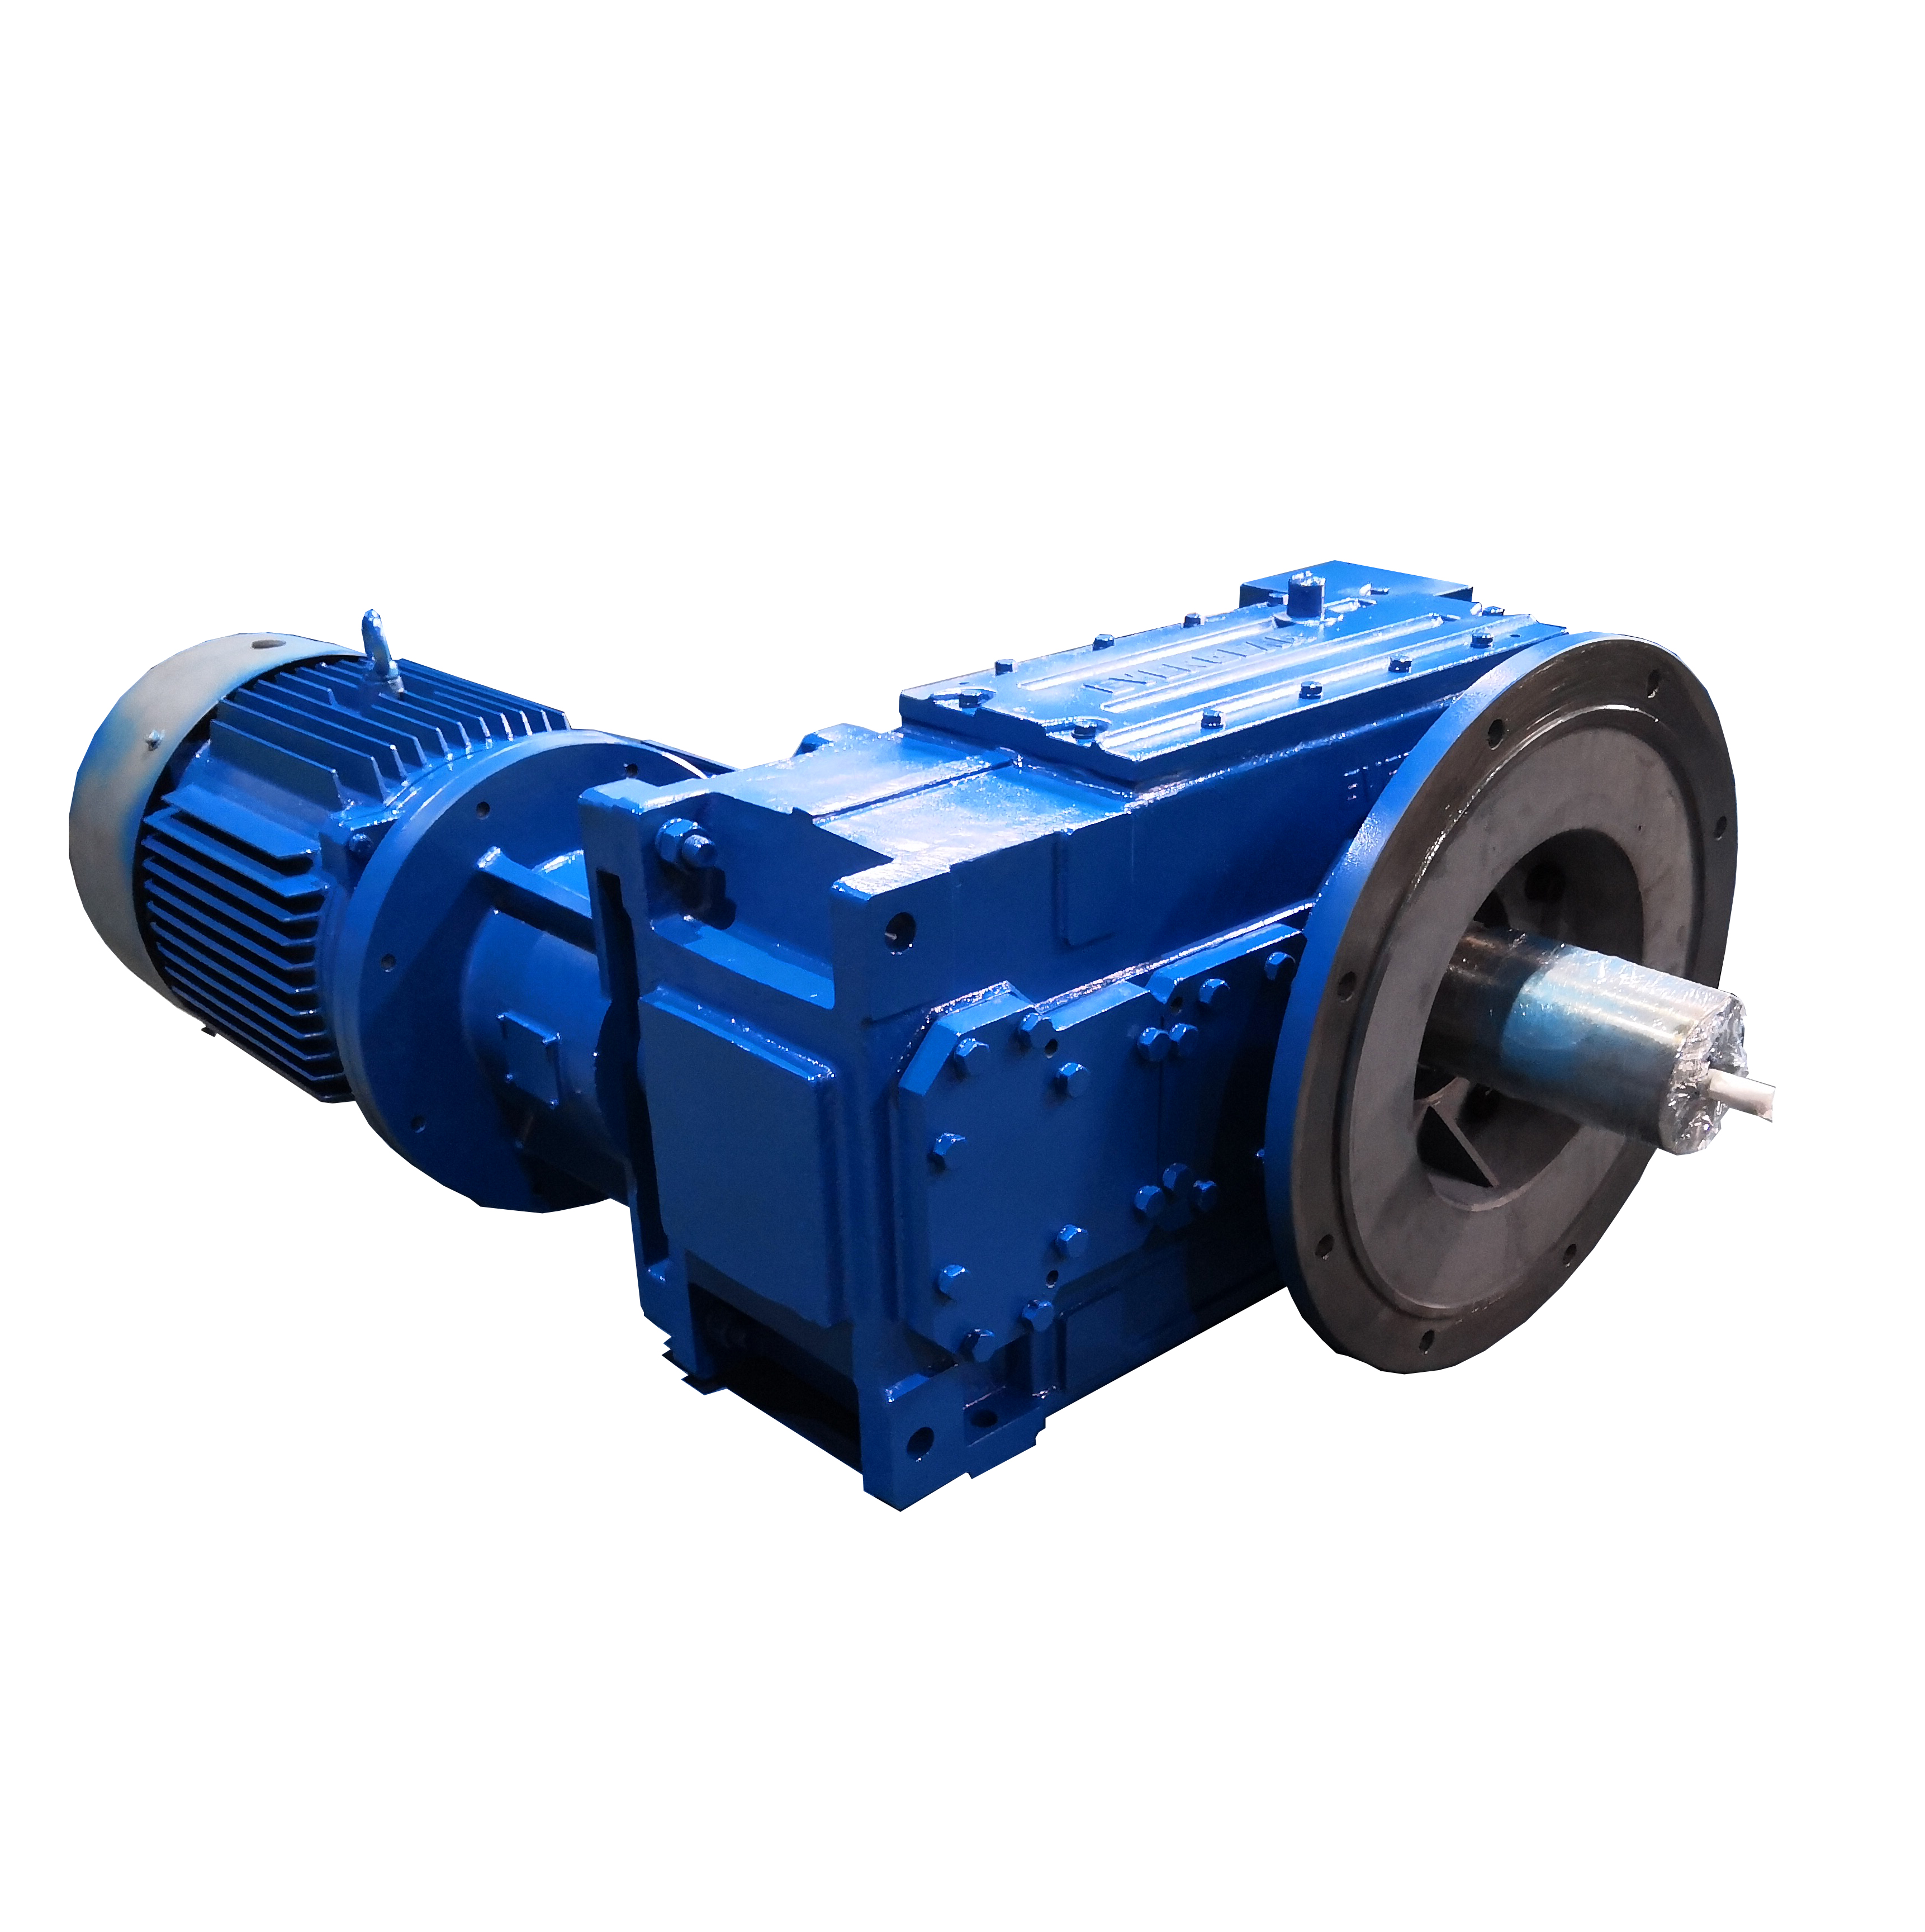 EVERGEAR H/B Series industrial gearbox/reducer for recycling conveyor